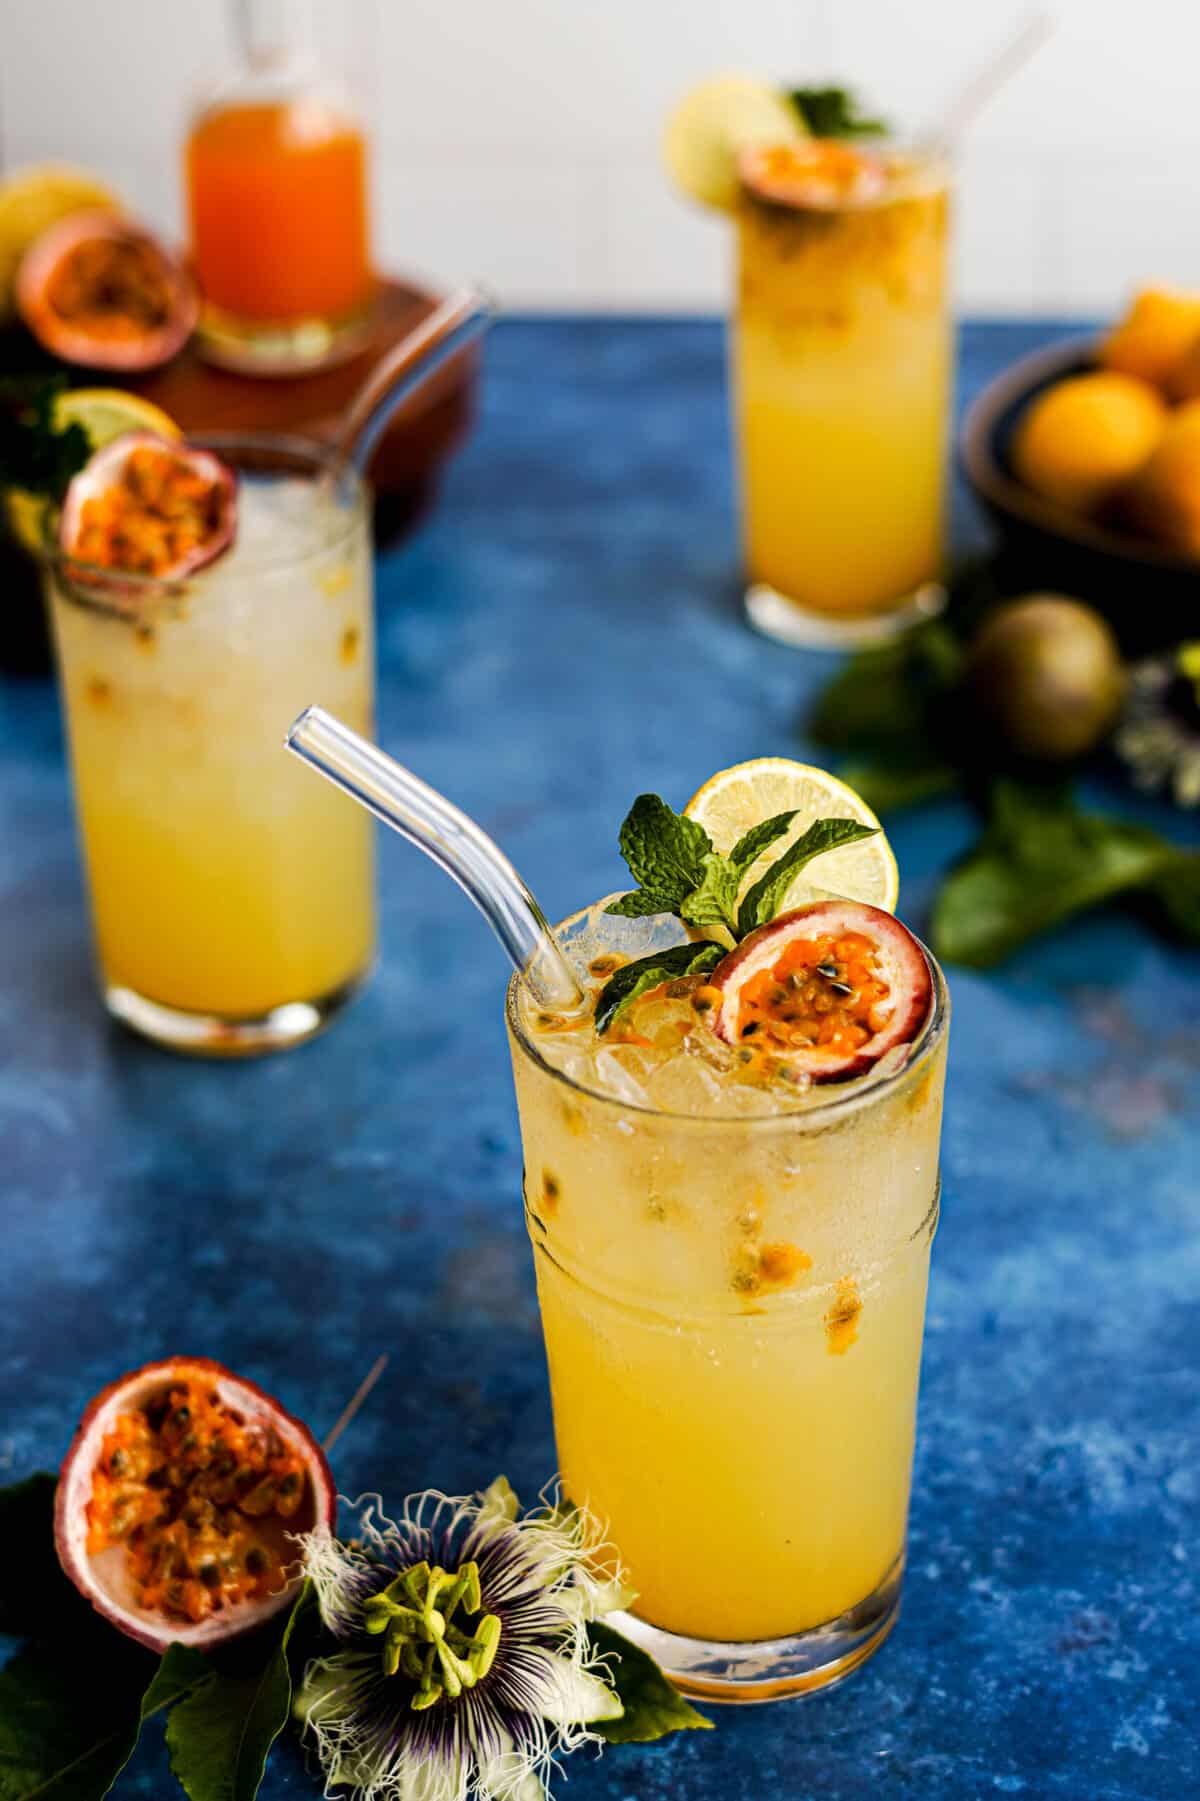 three glasses of passion fruit lemonade are on a counter top, with a small bottle of passion fruit simple syrup in the background. A sliced passion fruit sits in the foreground next to a passion flower.